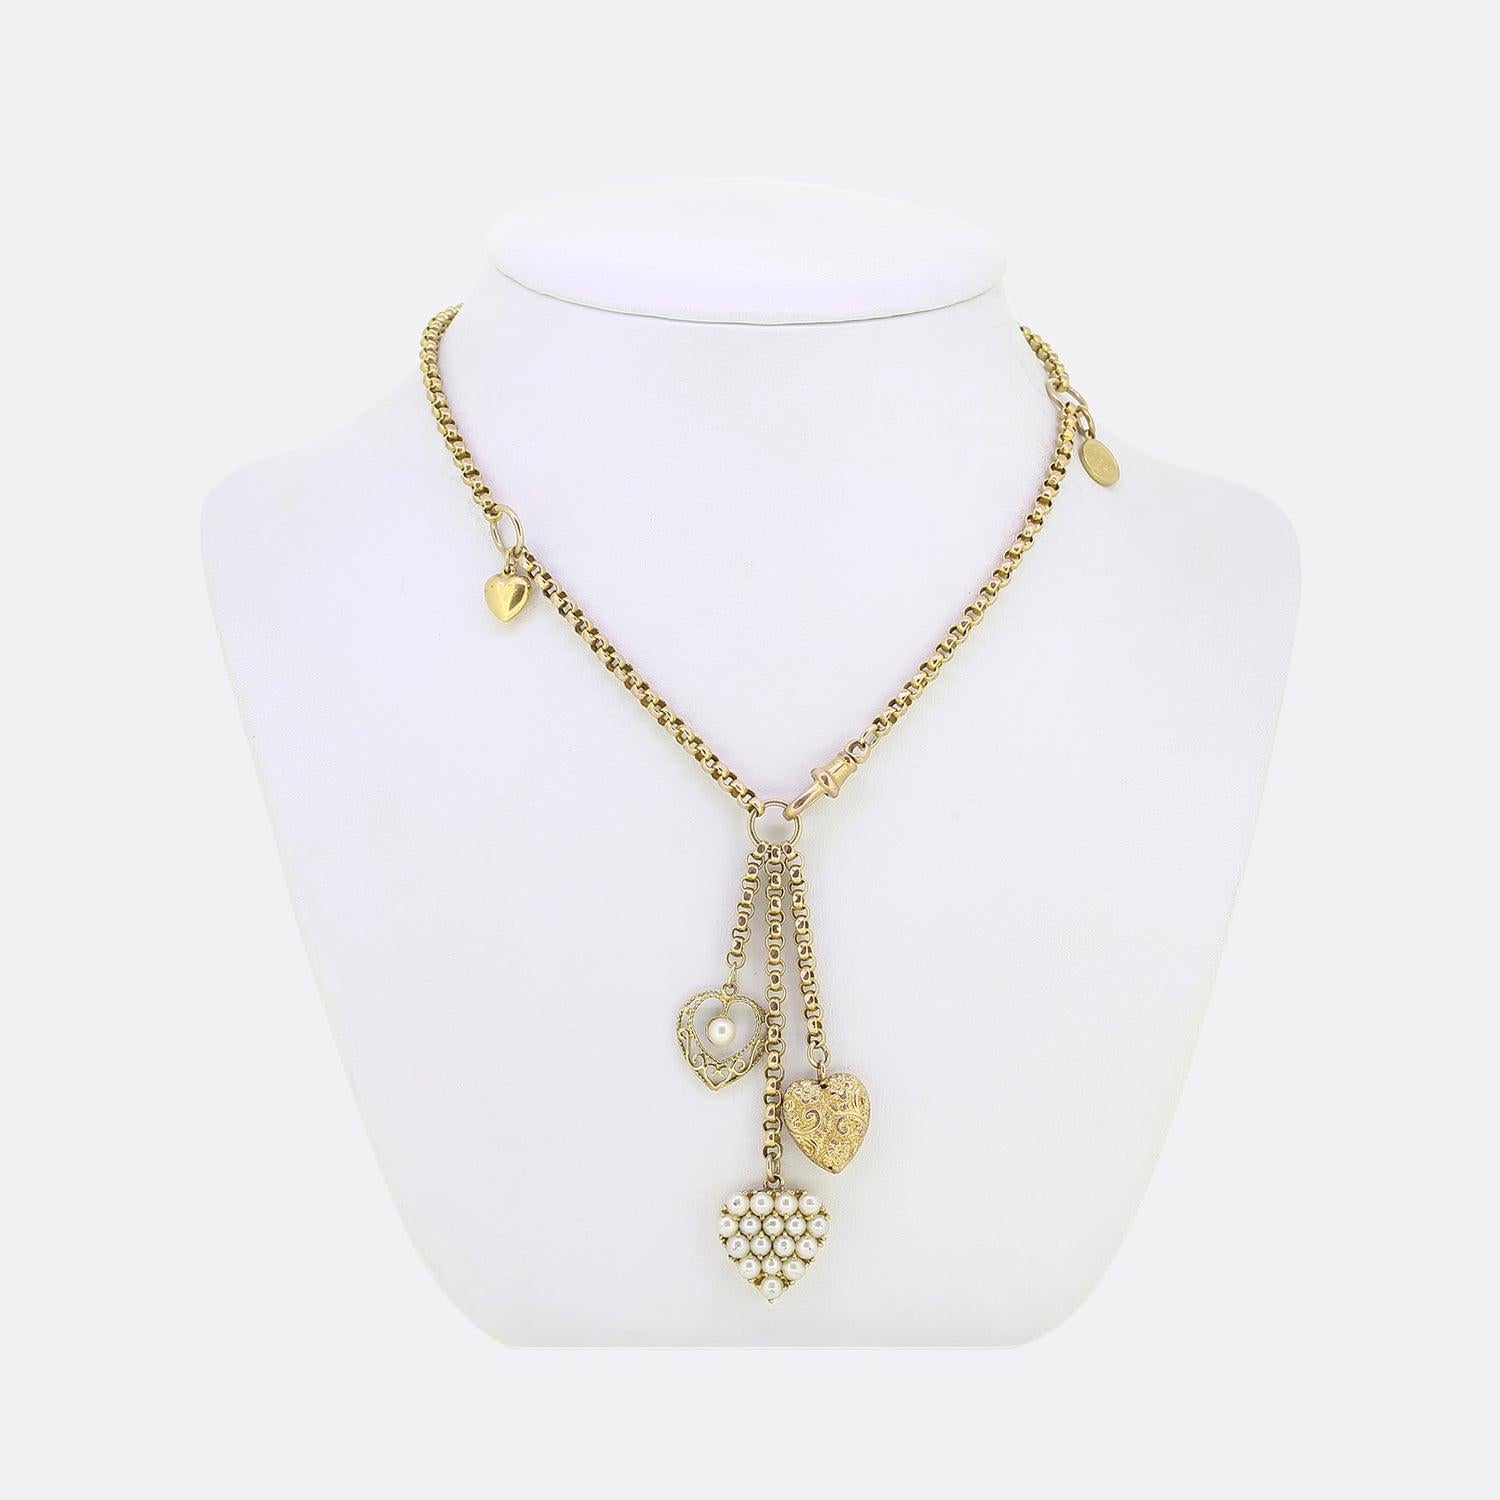 Here we have a vintage 9ct yellow gold belcher chain charm necklace. The necklace plays host to a three freely hanging love heart pendants. One heart plays host to a single natural pearl amidst an open pierced frame. The second is entirely set at